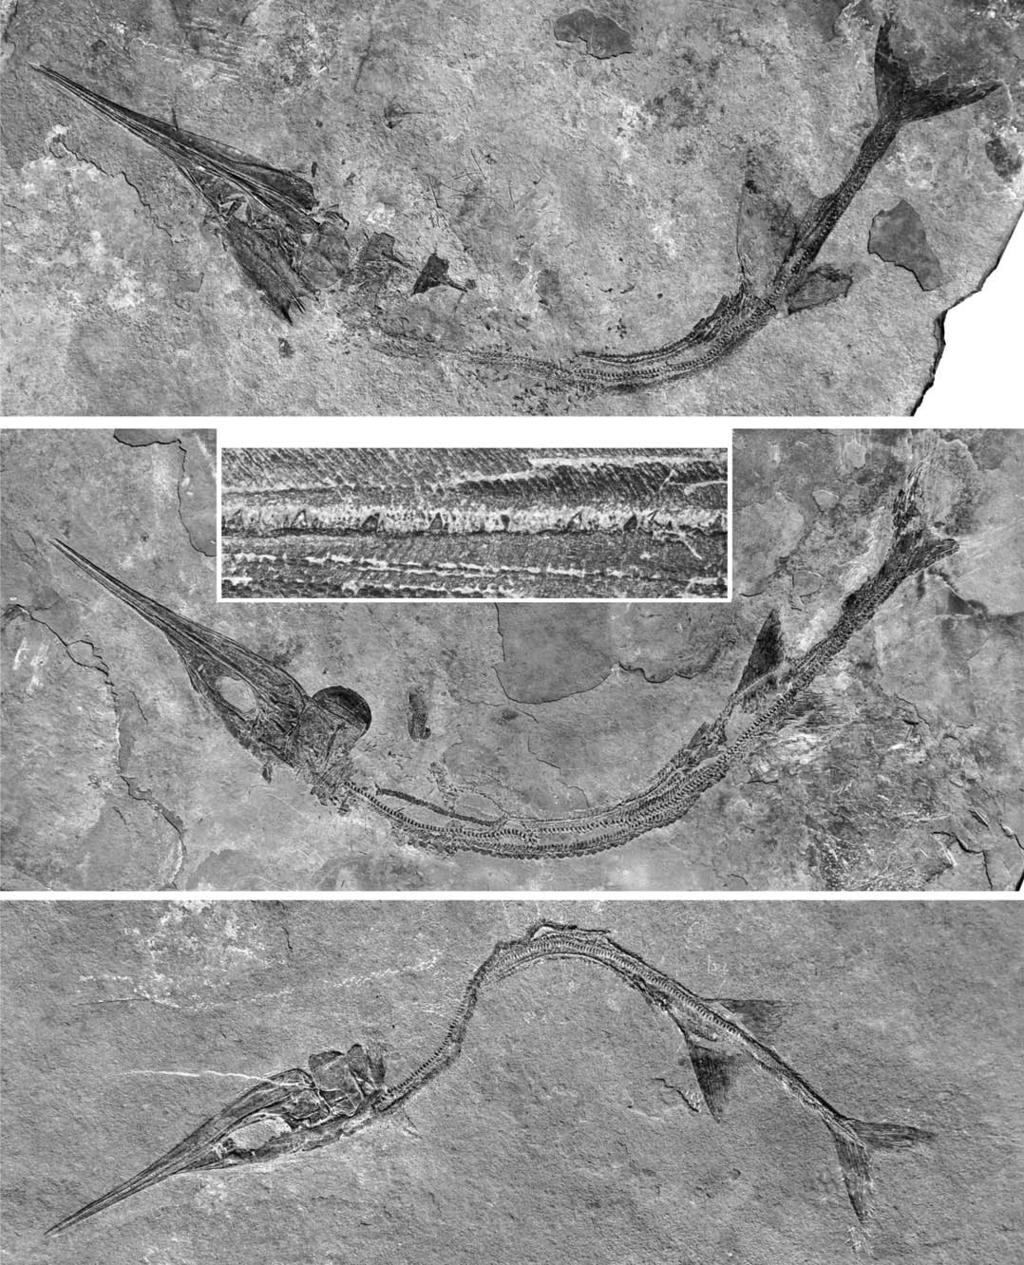 WU ET AL. MIDDLE TRIASSIC SAURICHTHYID FISHES FROM CHINA 605 Fig. 17. Photographs of saurichthyid fish Sinosaurichthys minuta gen. et sp. nov.